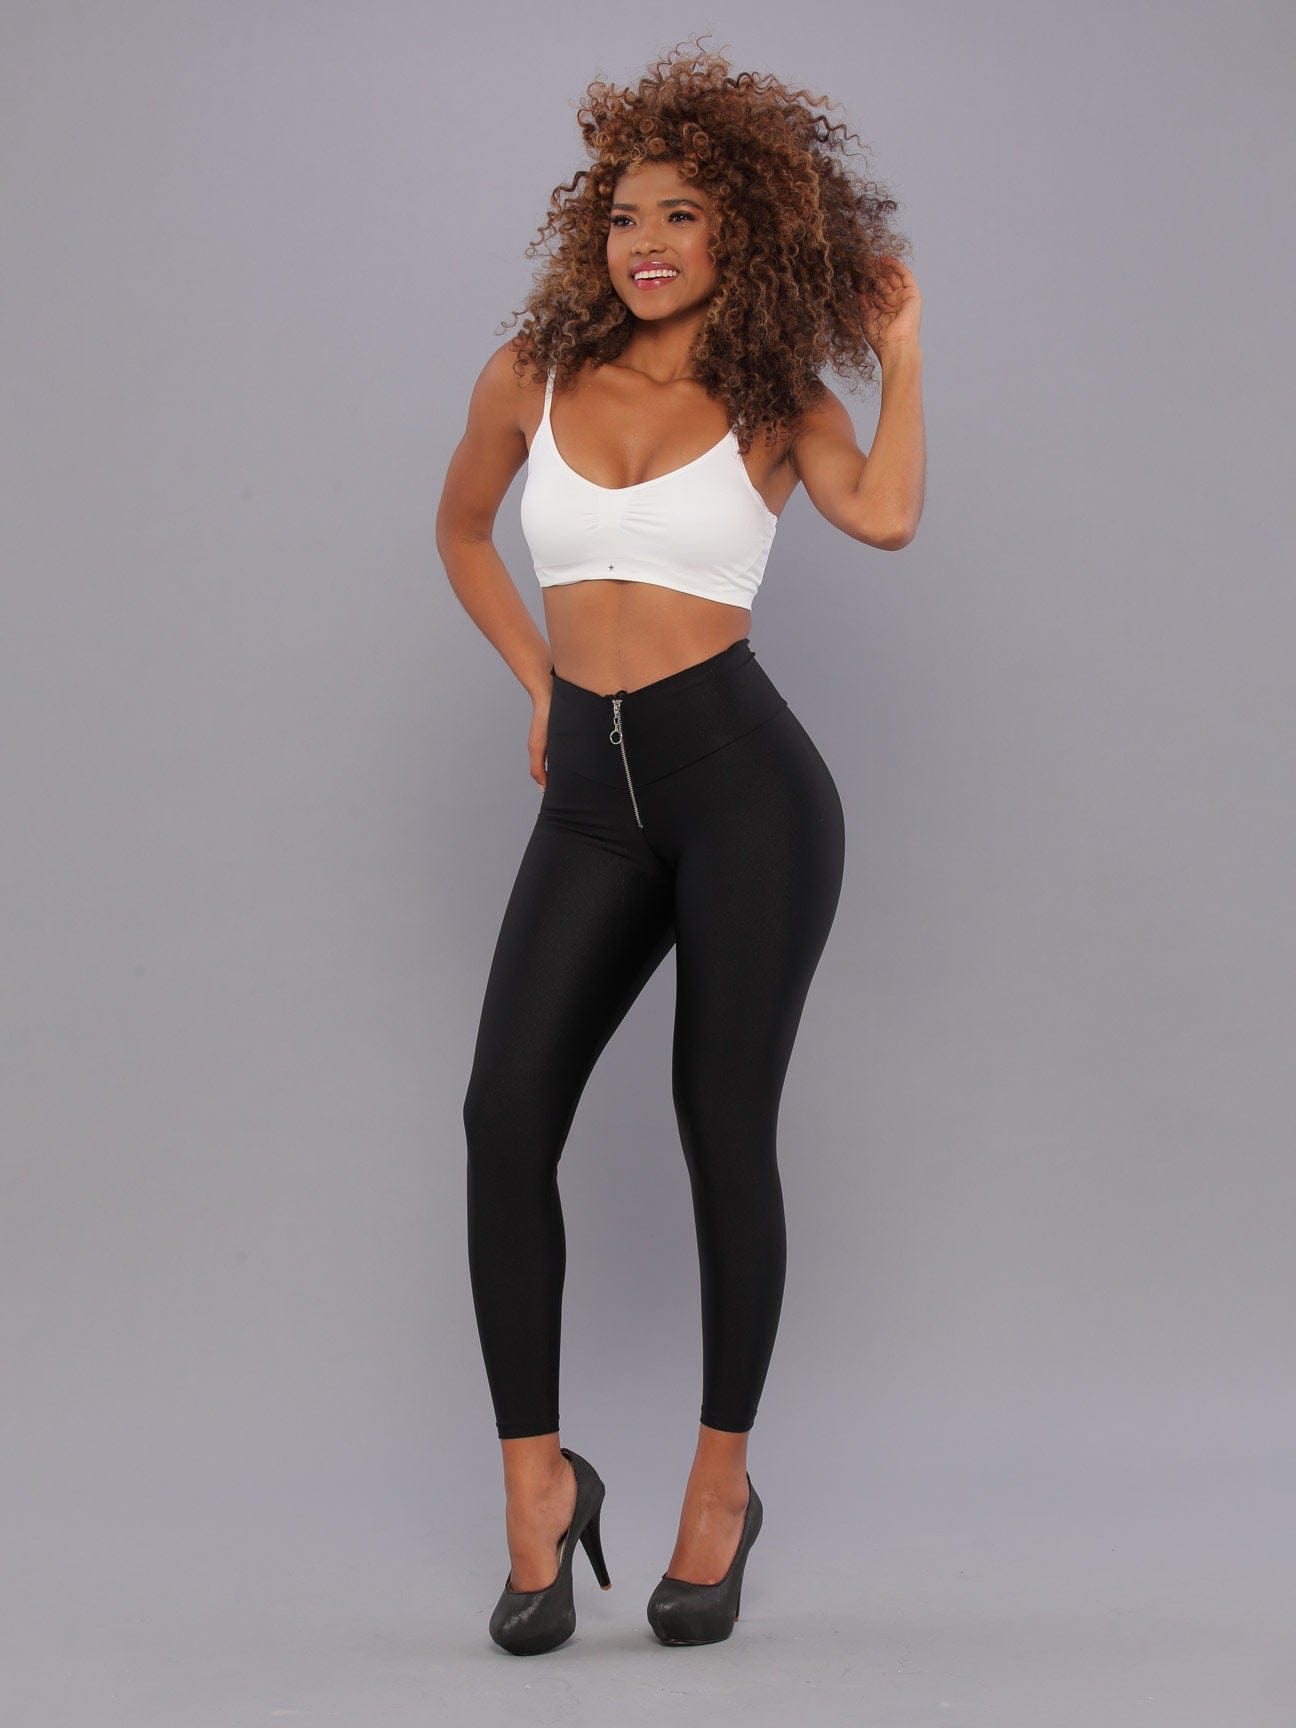 Femme Fatale Butt Lift Leggings with Tummy Control 1306